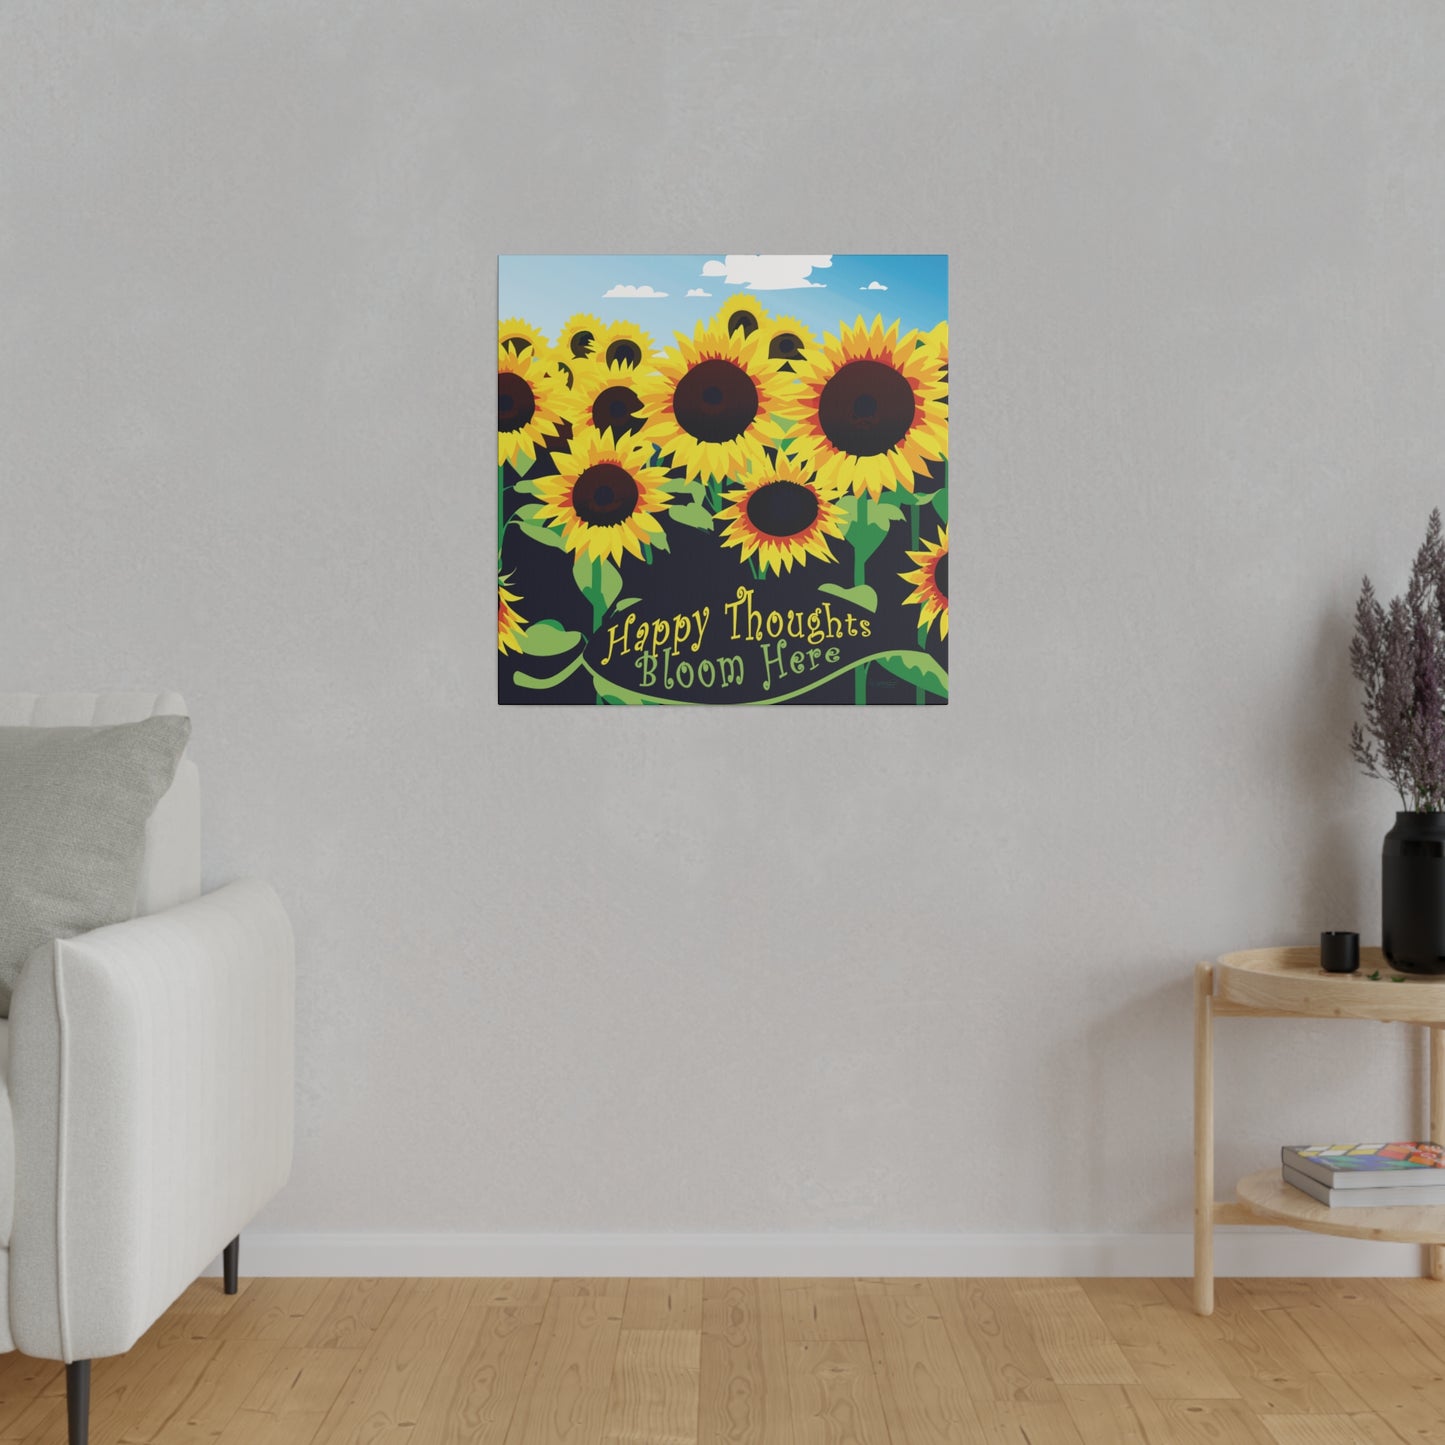 Happy Thoughts Bloom Here: A Burst of Sunshine for Your Walls on Matte Stretched Canvas